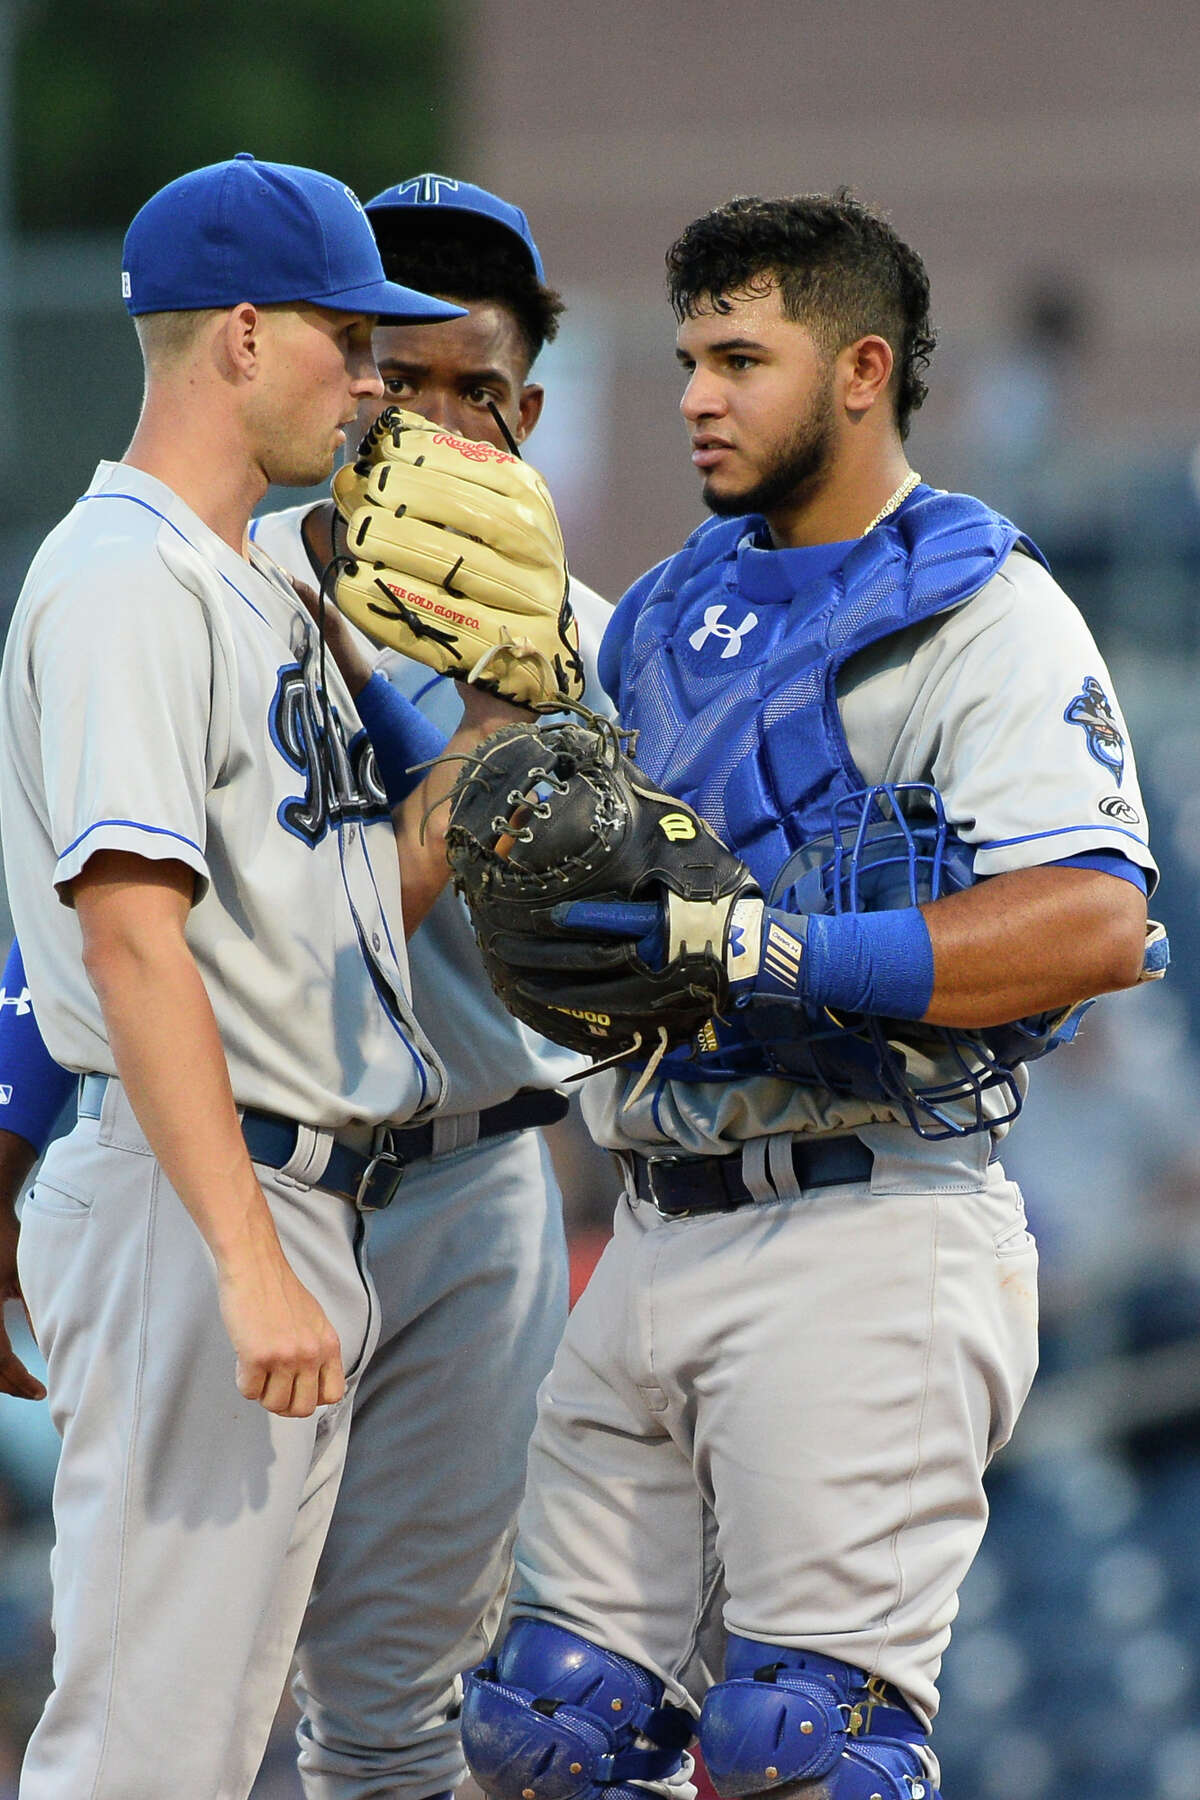 TEXAS LEAGUE: Drillers' Ruiz has maturity, determination to be great